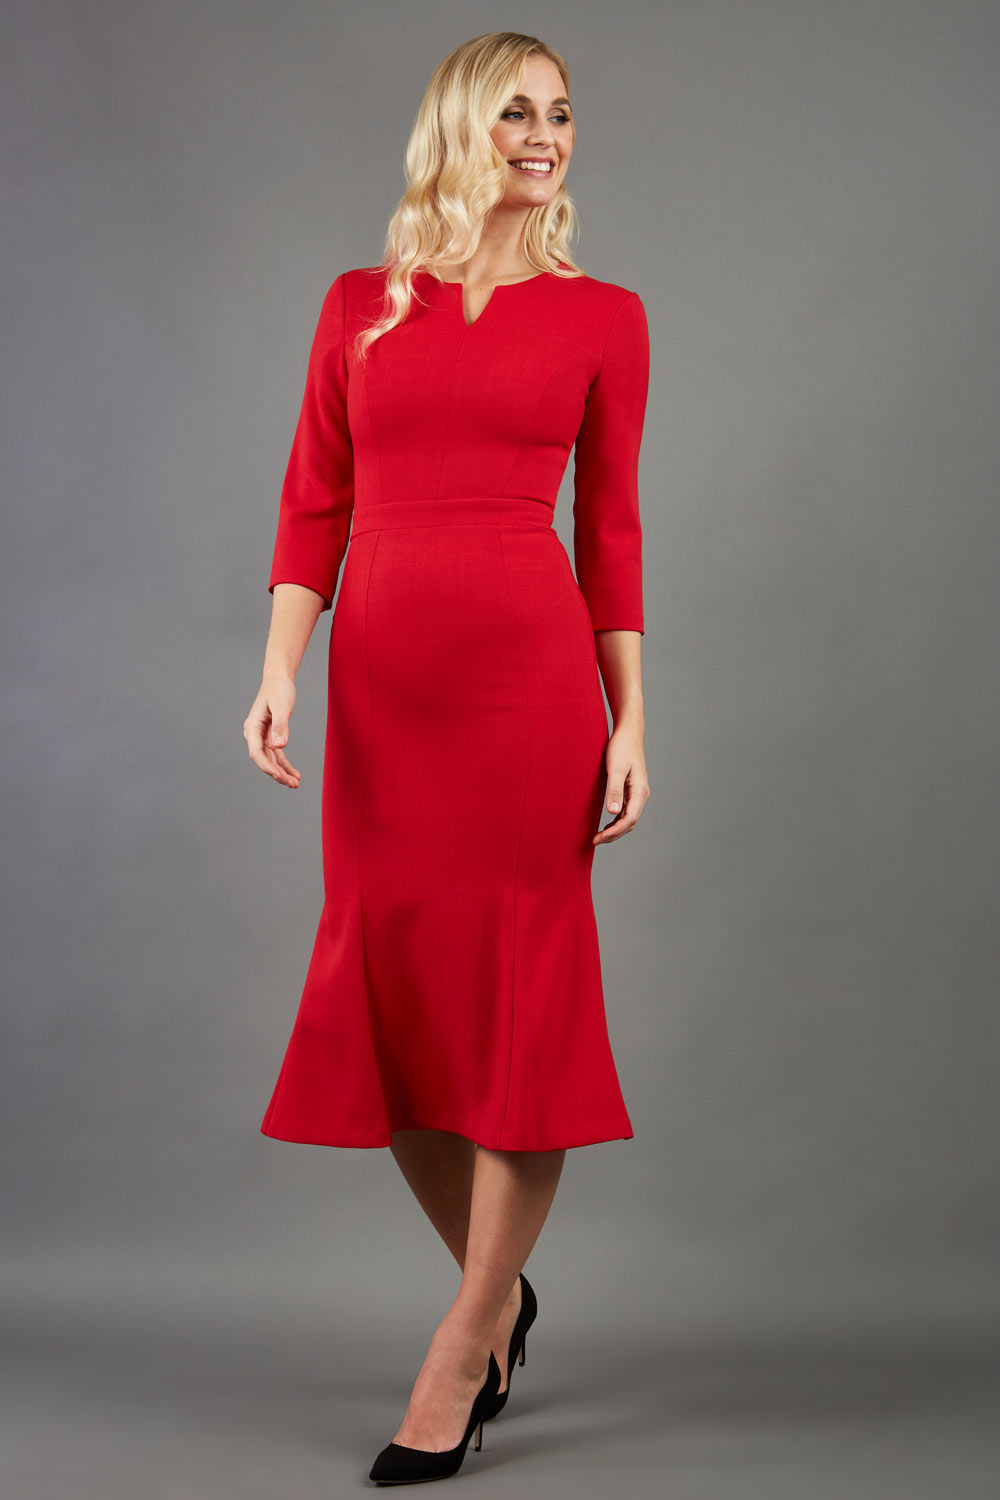 blonde model is wearing diva catwalk senne midaxi sleeved dress with fishtail and rounded neckline with a slit in the middle in red front